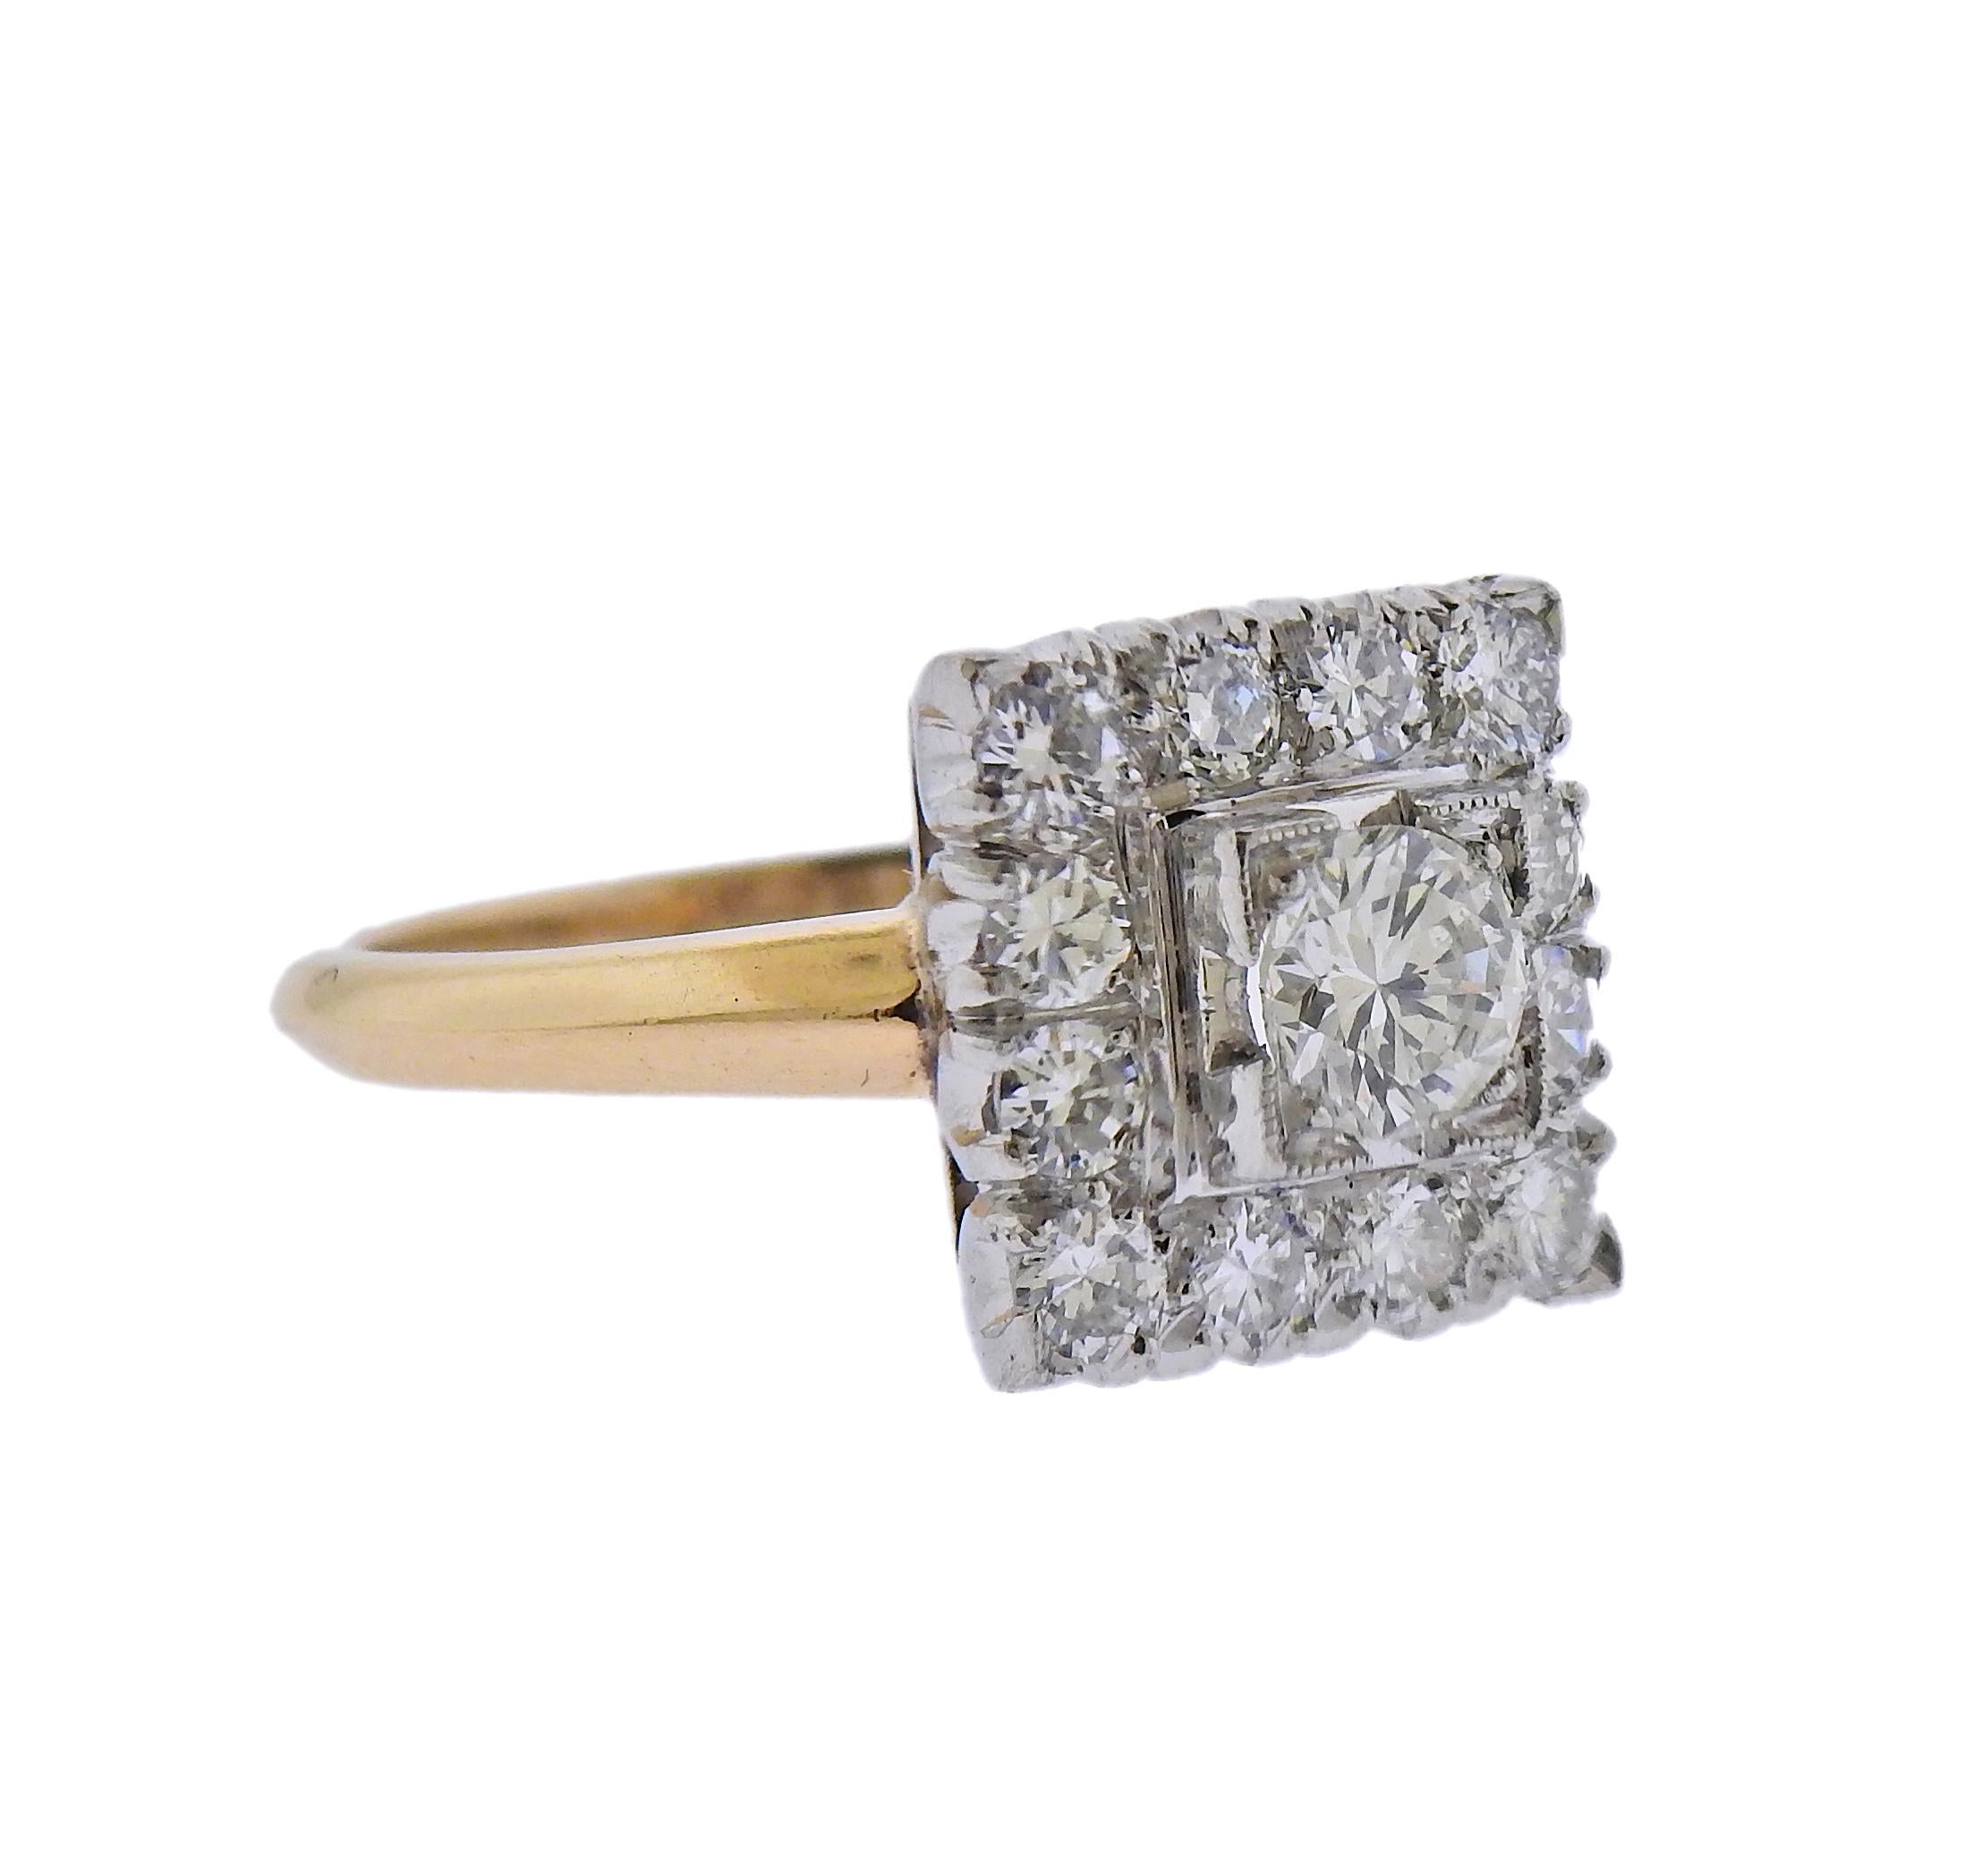 14k gold and platinum ring, set with approx. 0.47ct center diamond, surrounded with approx. 0.84ctw in surrounding diamonds. Ring size - 6, ring top - 12mm x 12mm. Marked Plat 14k. Weight - 6.4 grams. 